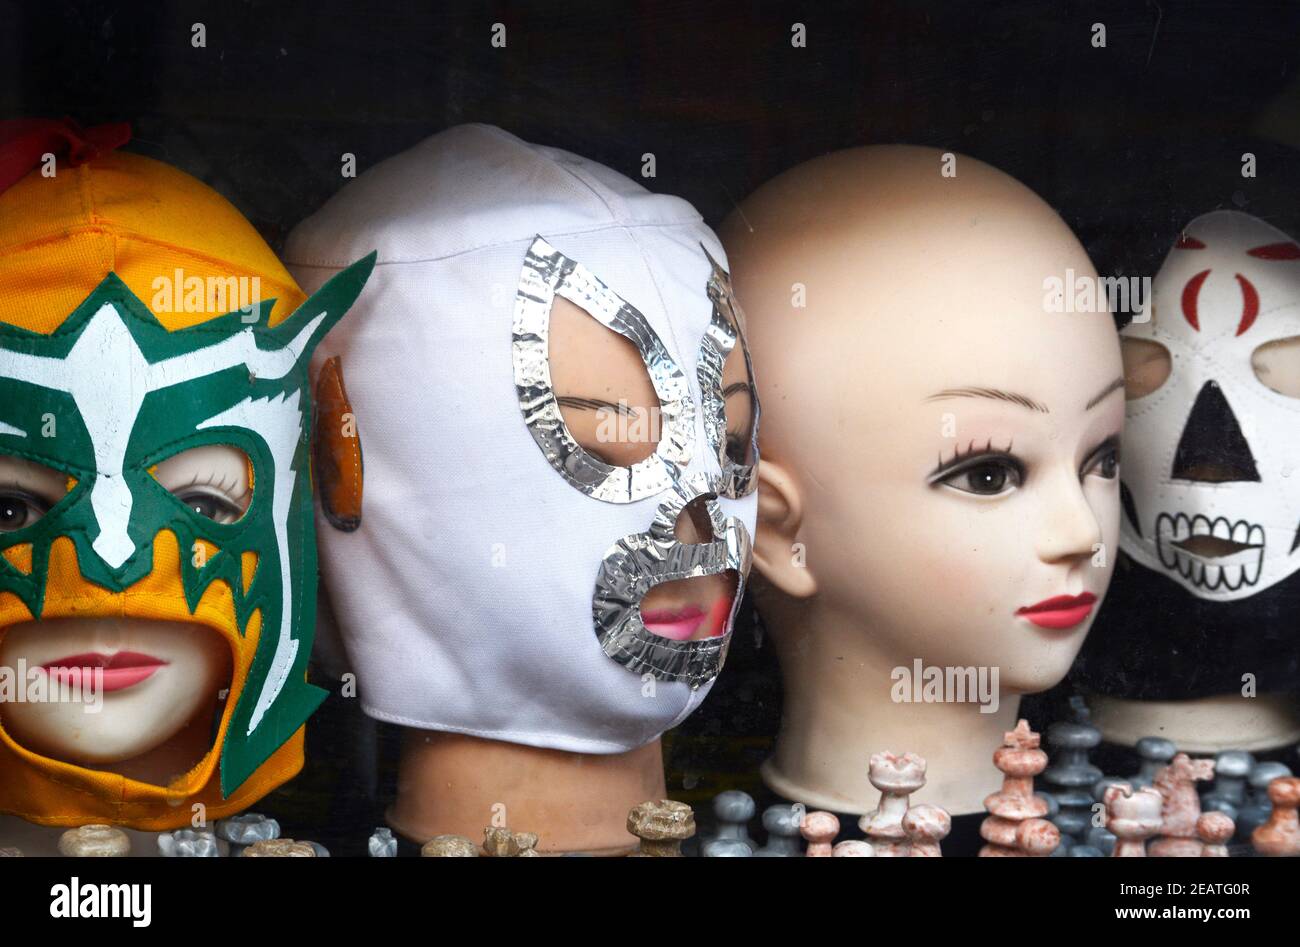 Souvenir Mexican lucha libre masks, similar to those worn by professional wrestlers, for sale in a shop in San Antonio, Texas. Stock Photo